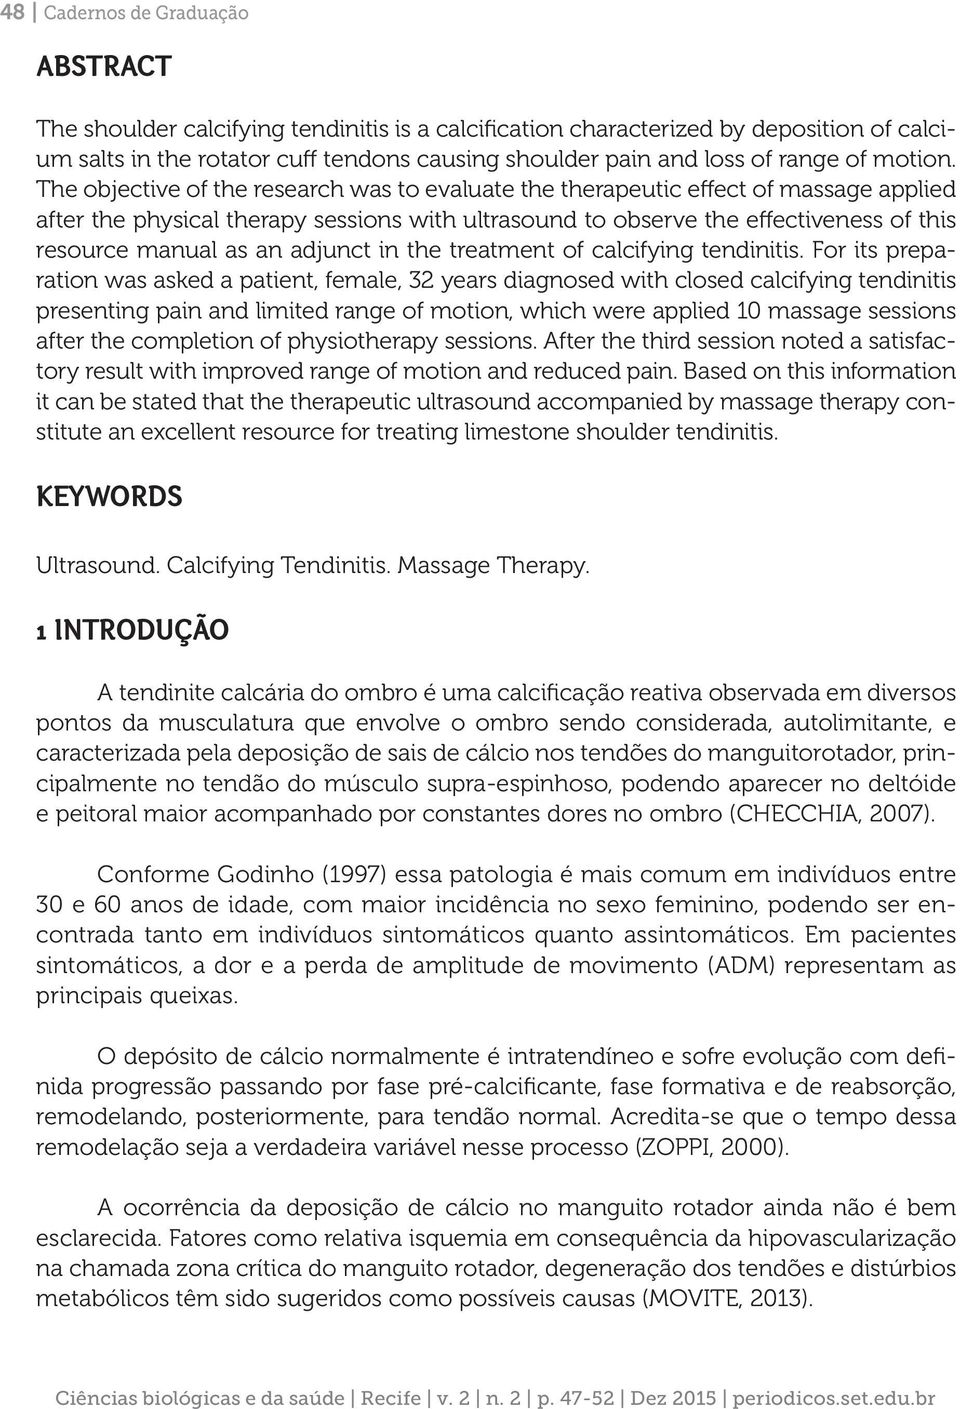 The objective of the research was to evaluate the therapeutic effect of massage applied after the physical therapy sessions with ultrasound to observe the effectiveness of this resource manual as an